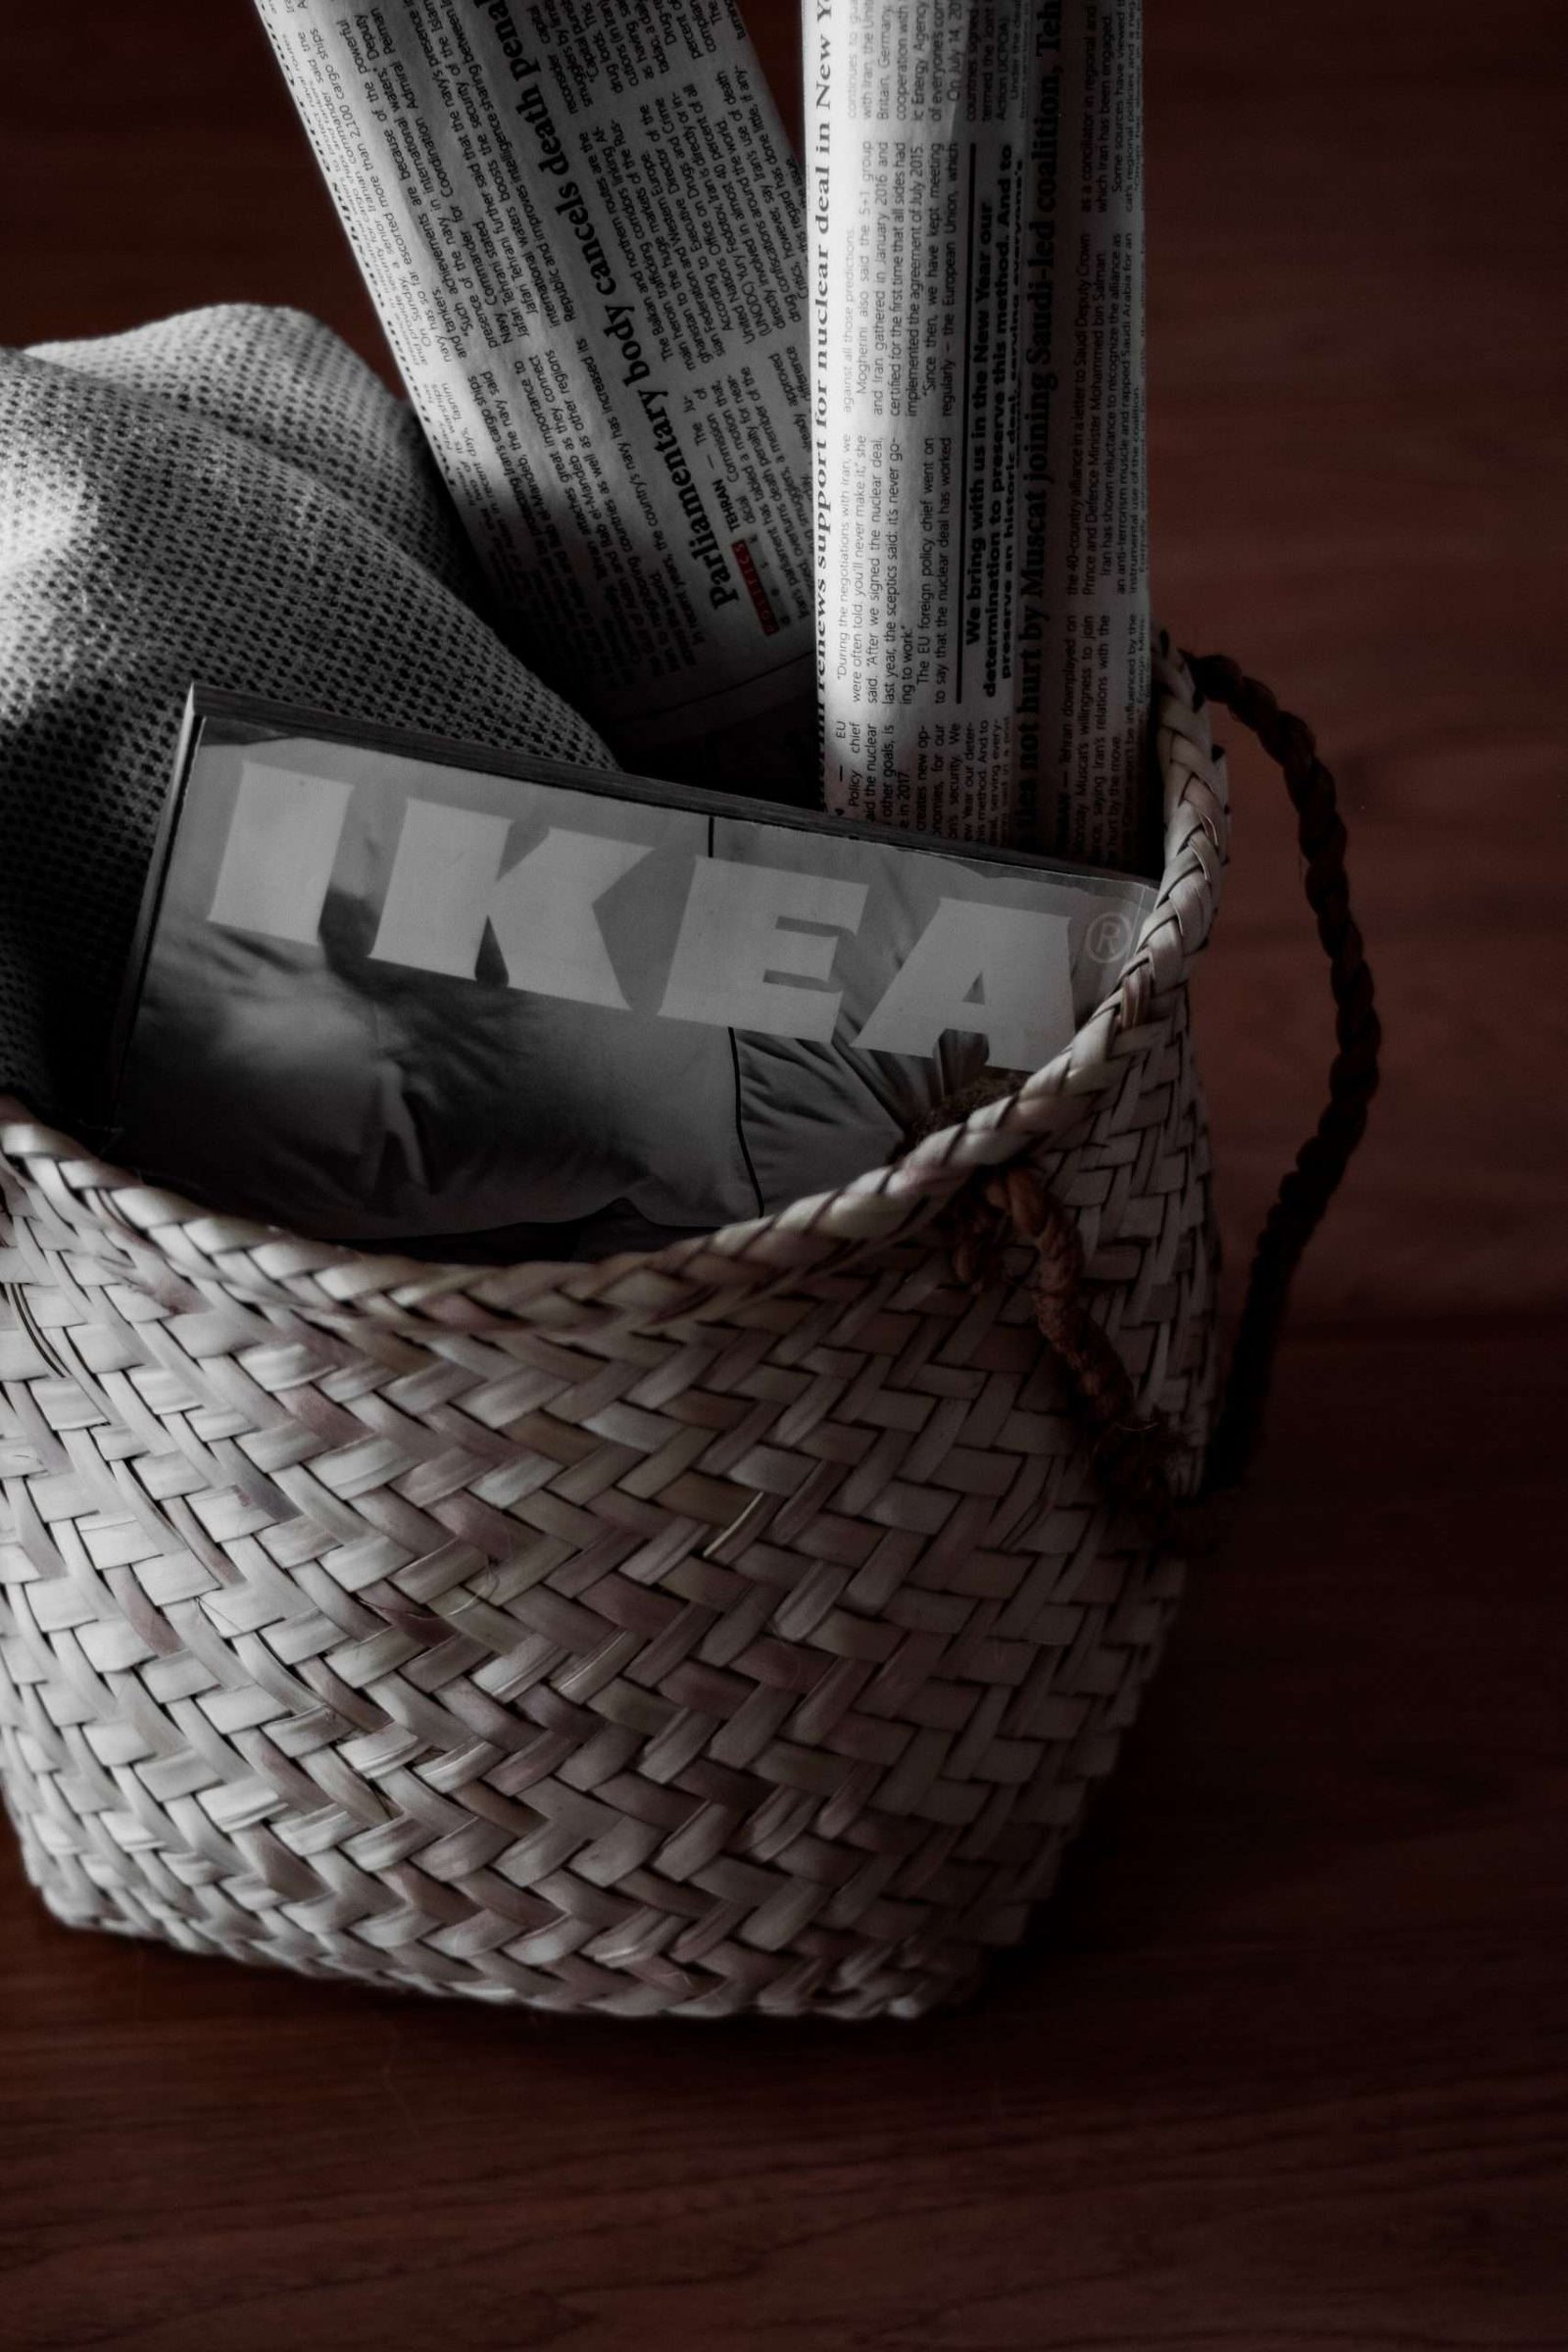 IKEA: An iconic print magazine put to bed